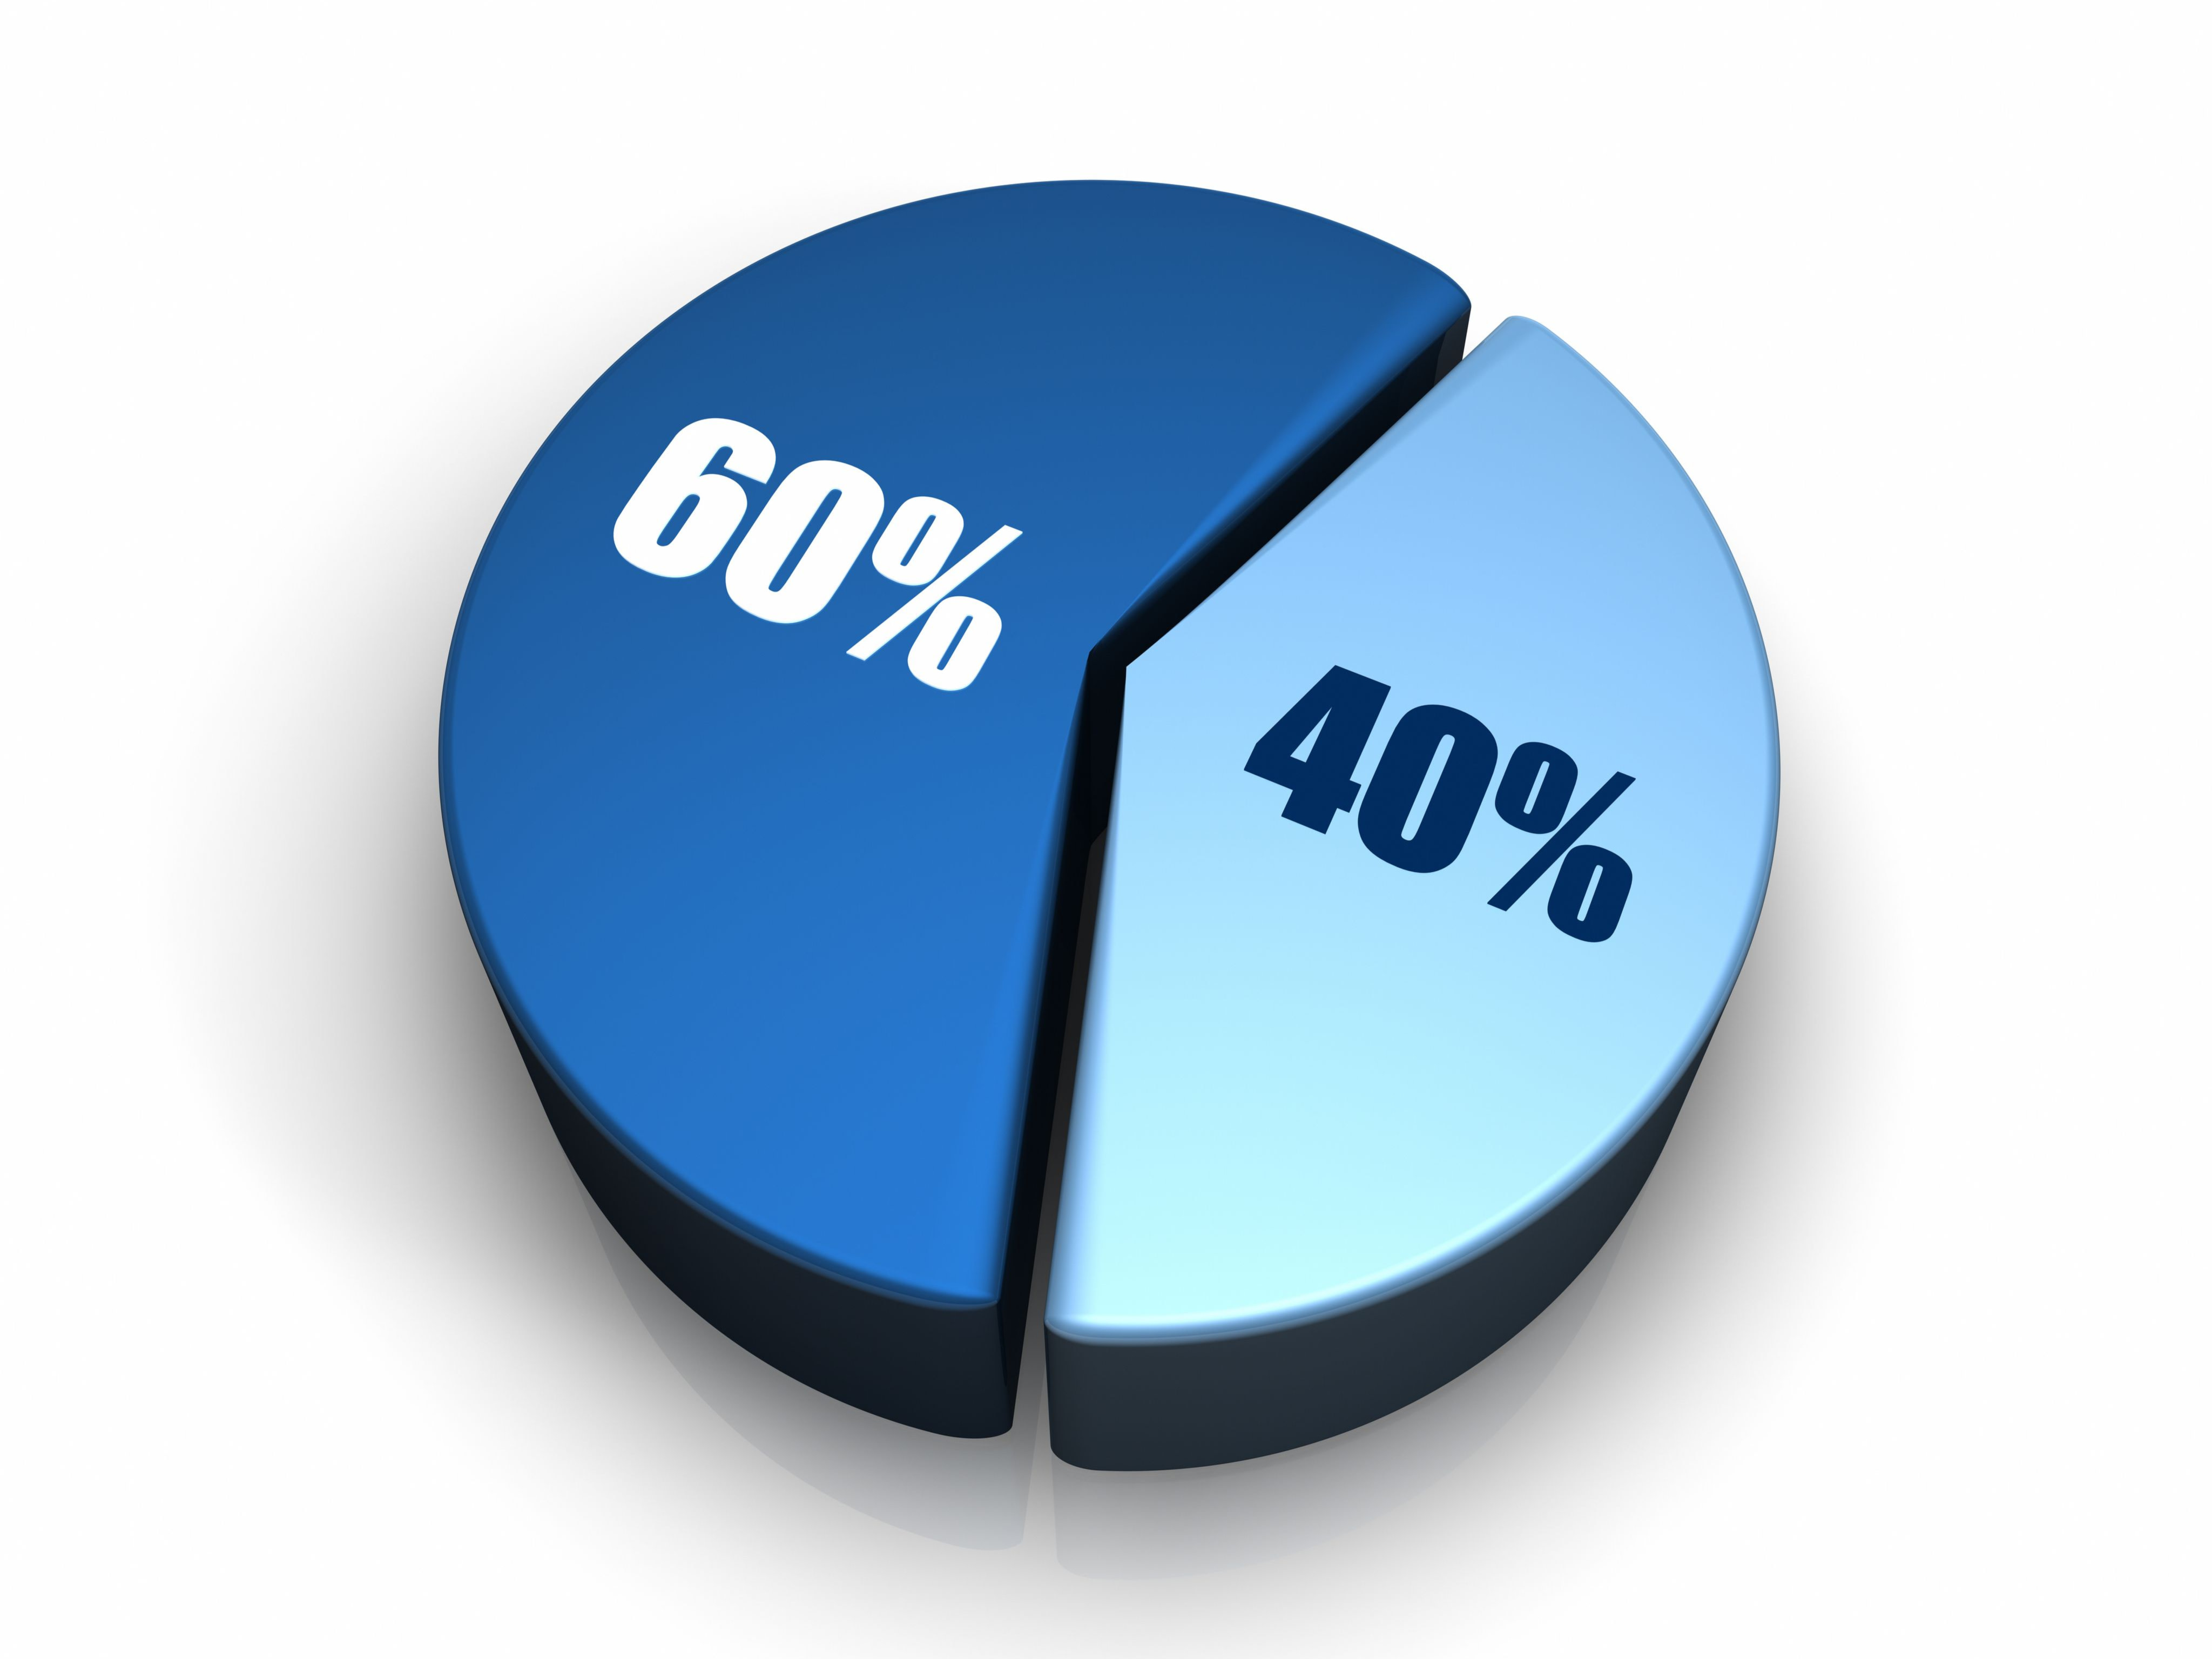 Blue pie chart with forty and sixty percent